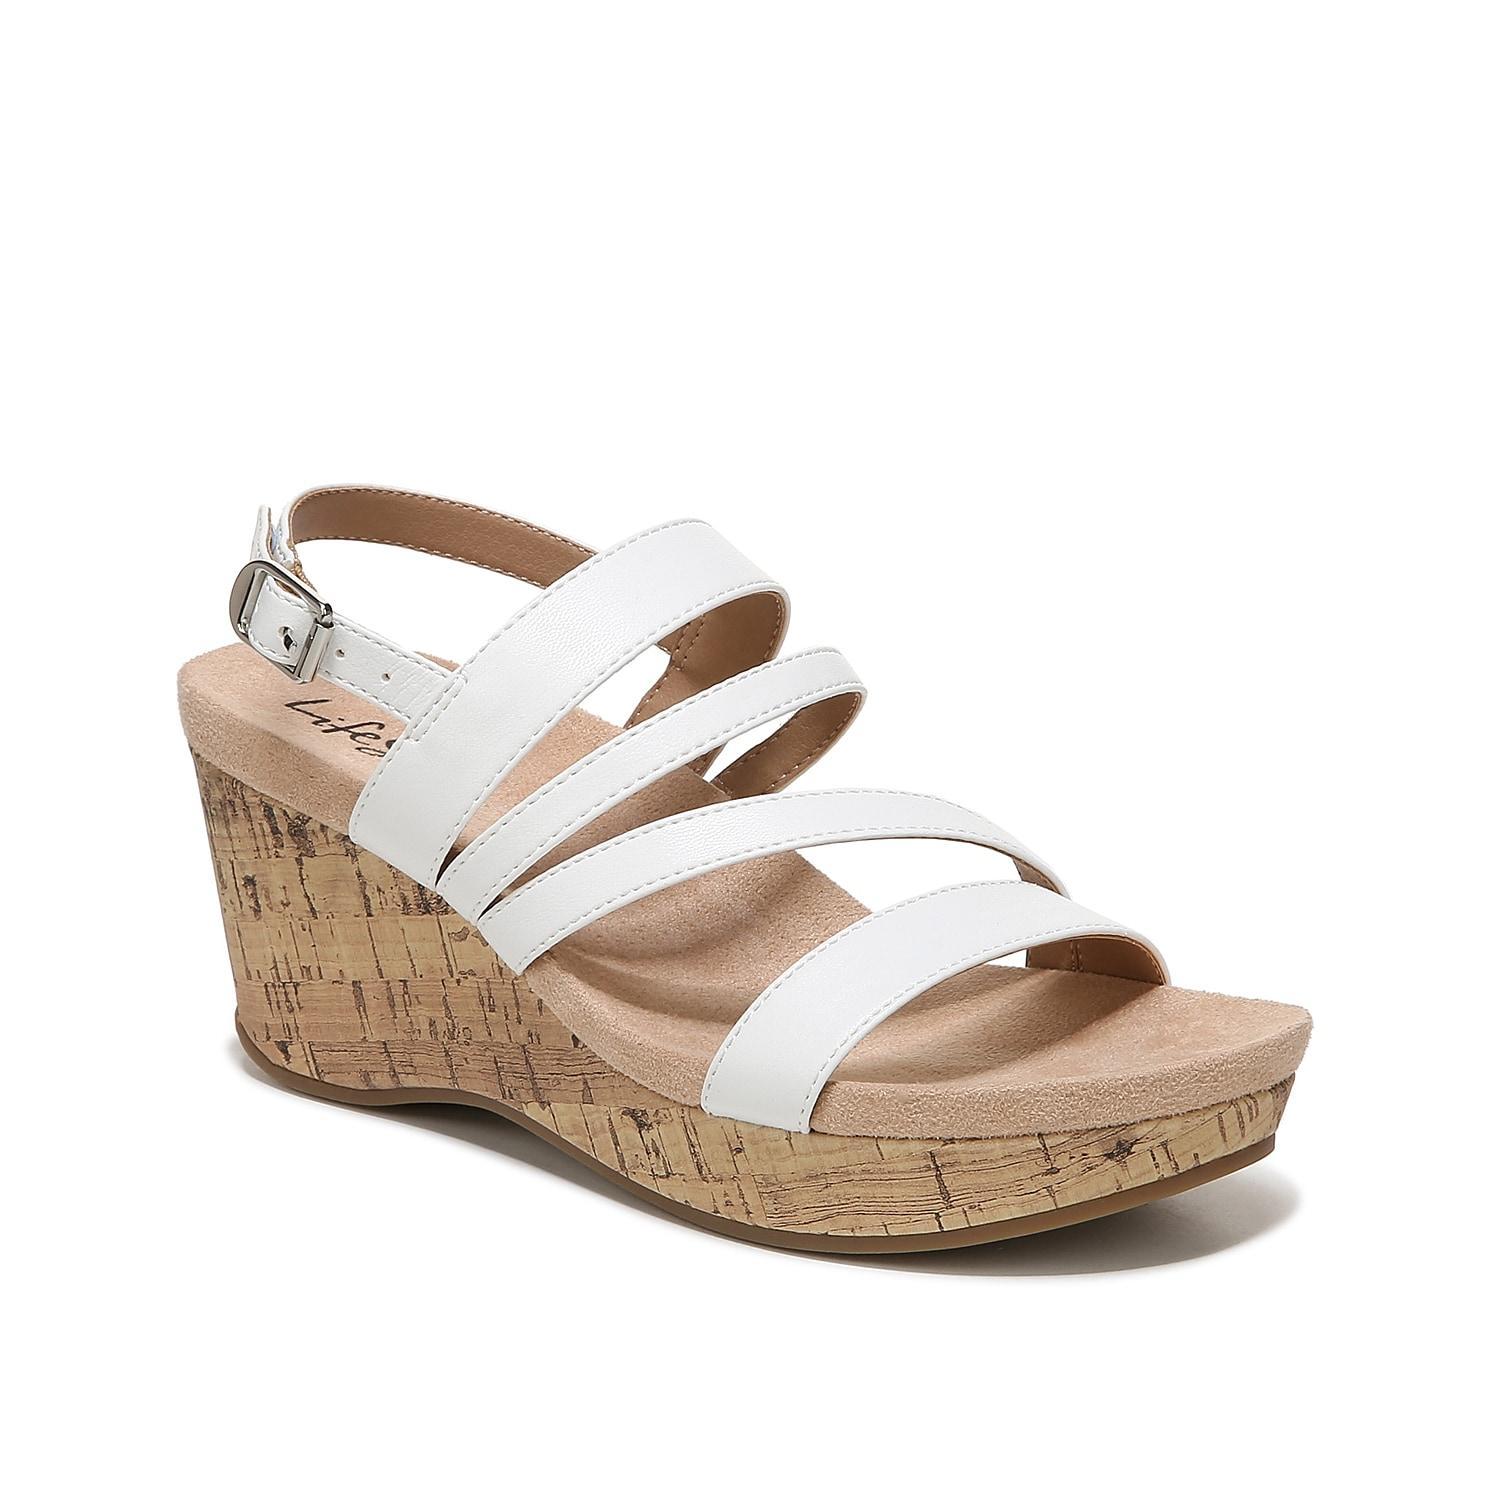 LifeStride Discover Wedge Sandal Product Image